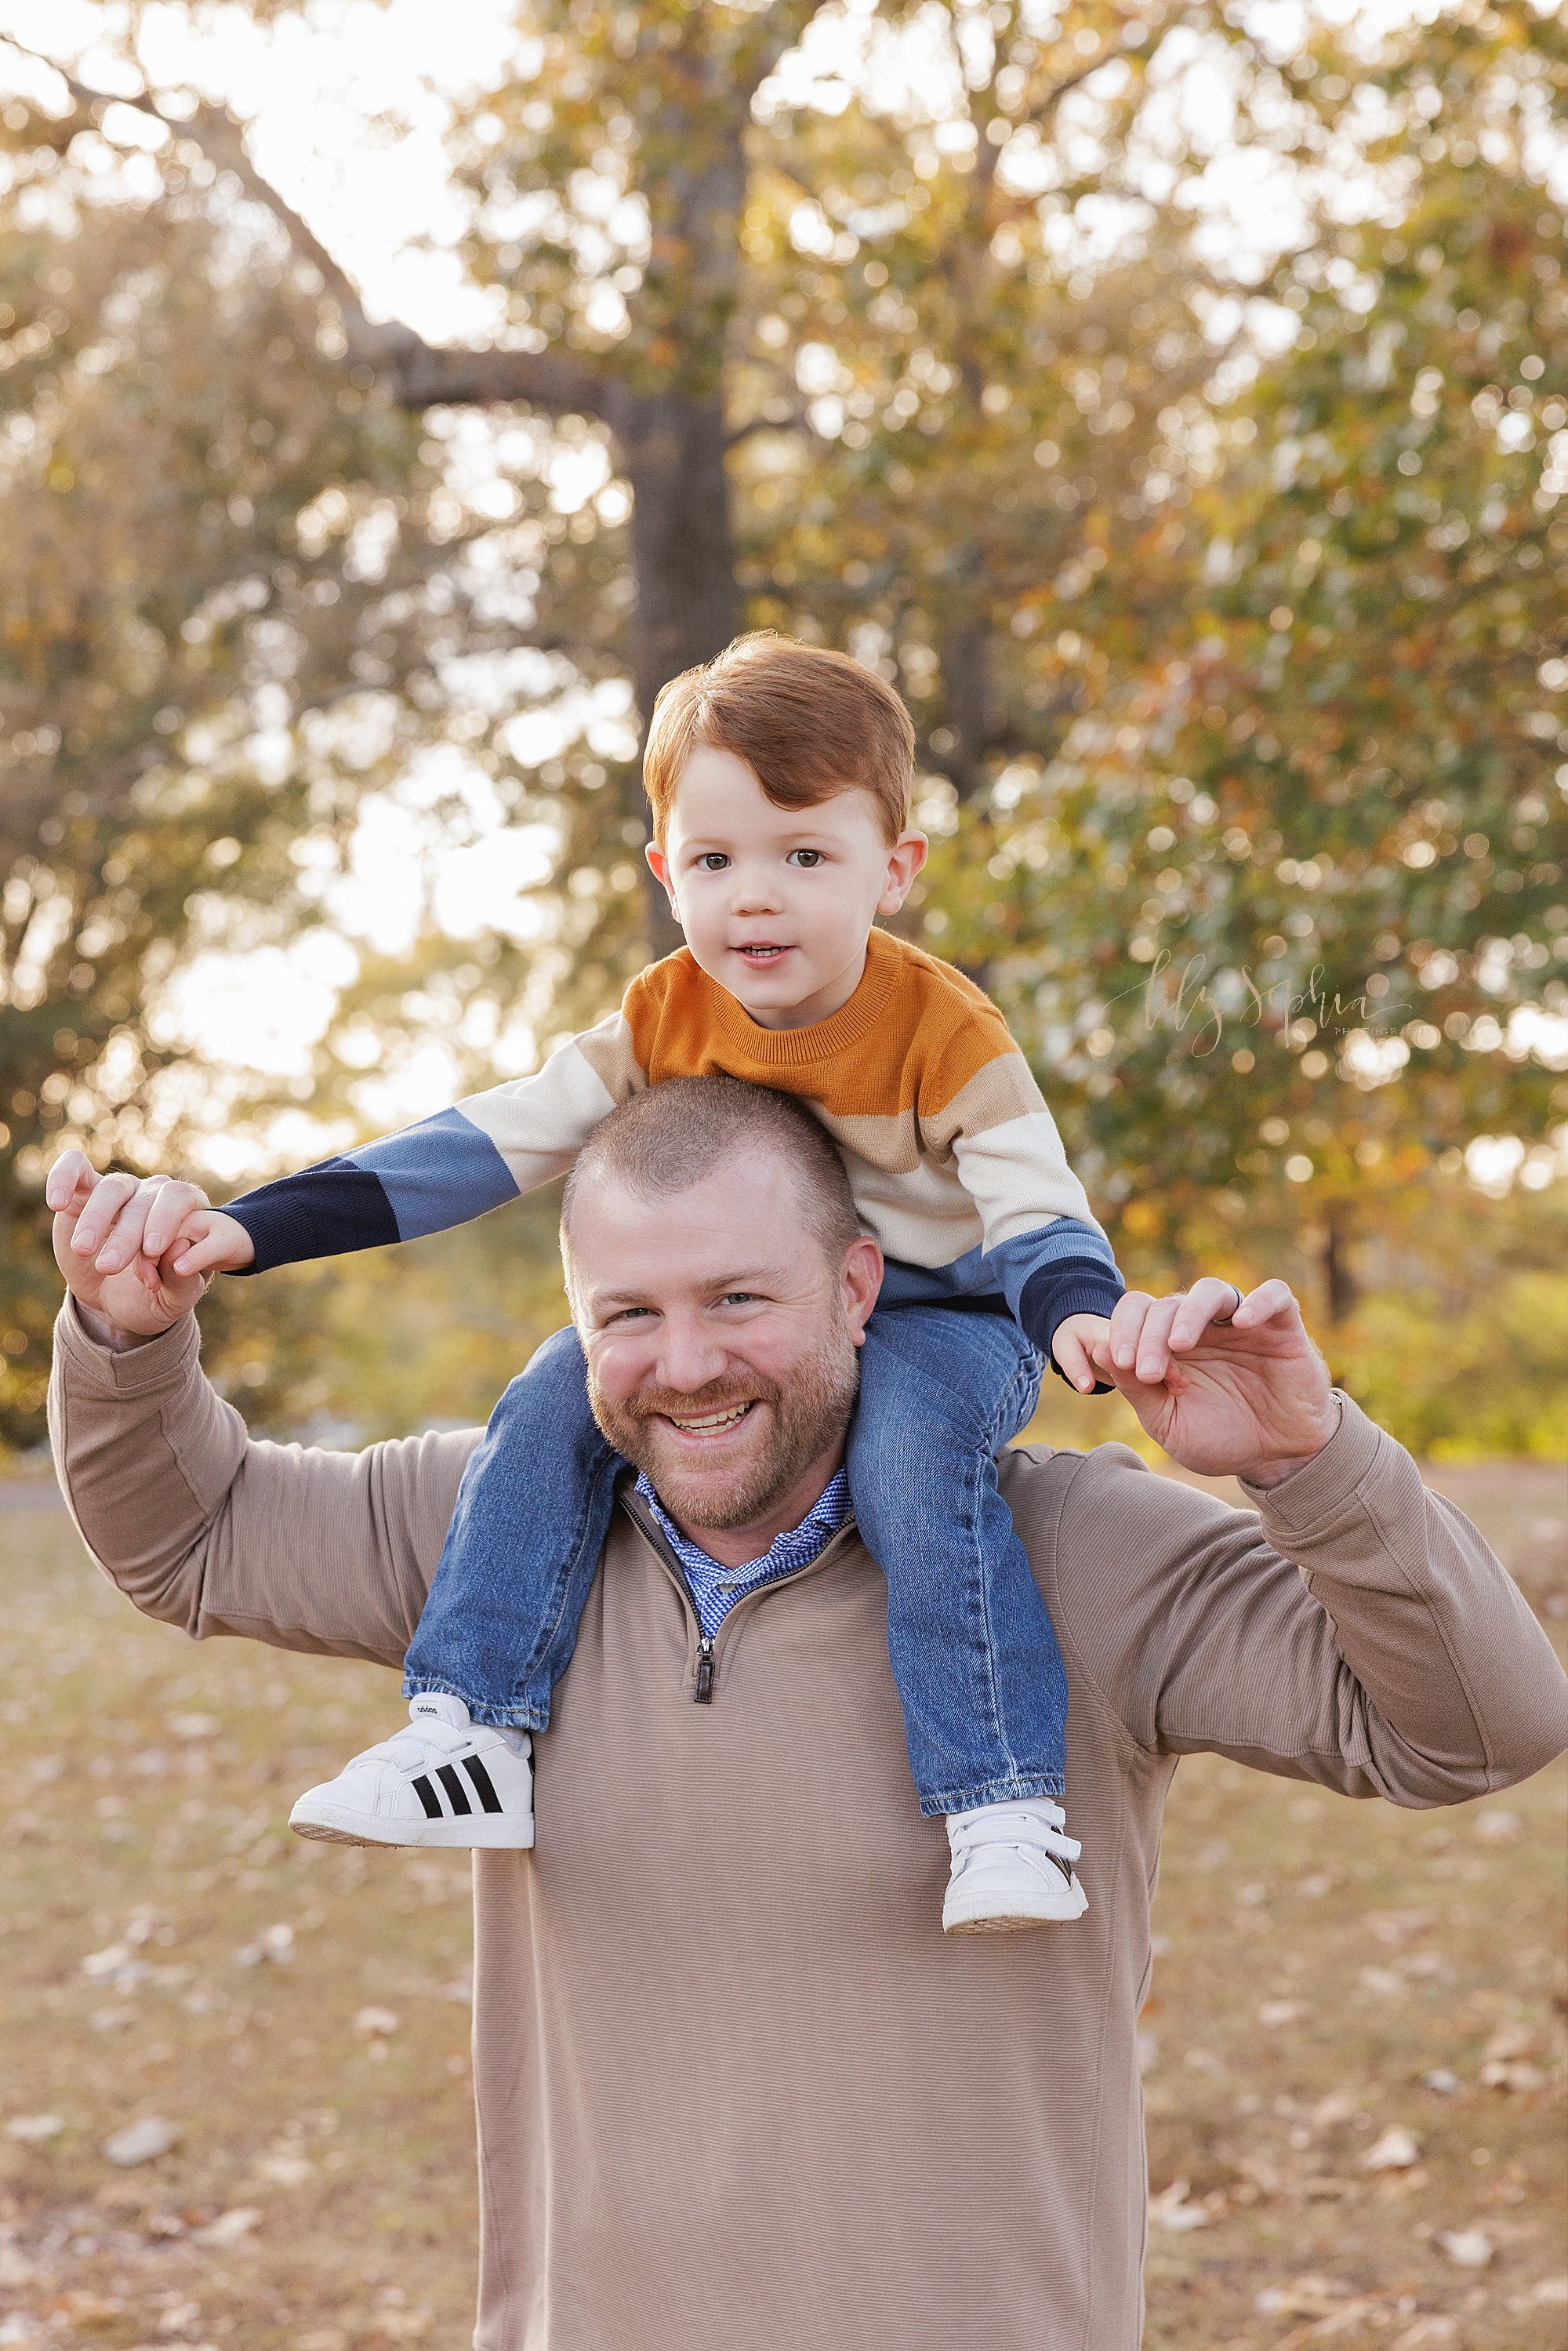  Family photo of a father carrying his young son on his shoulders as he holds his hands taken at sunset in a park near Atlanta, Georgia during autumn. 